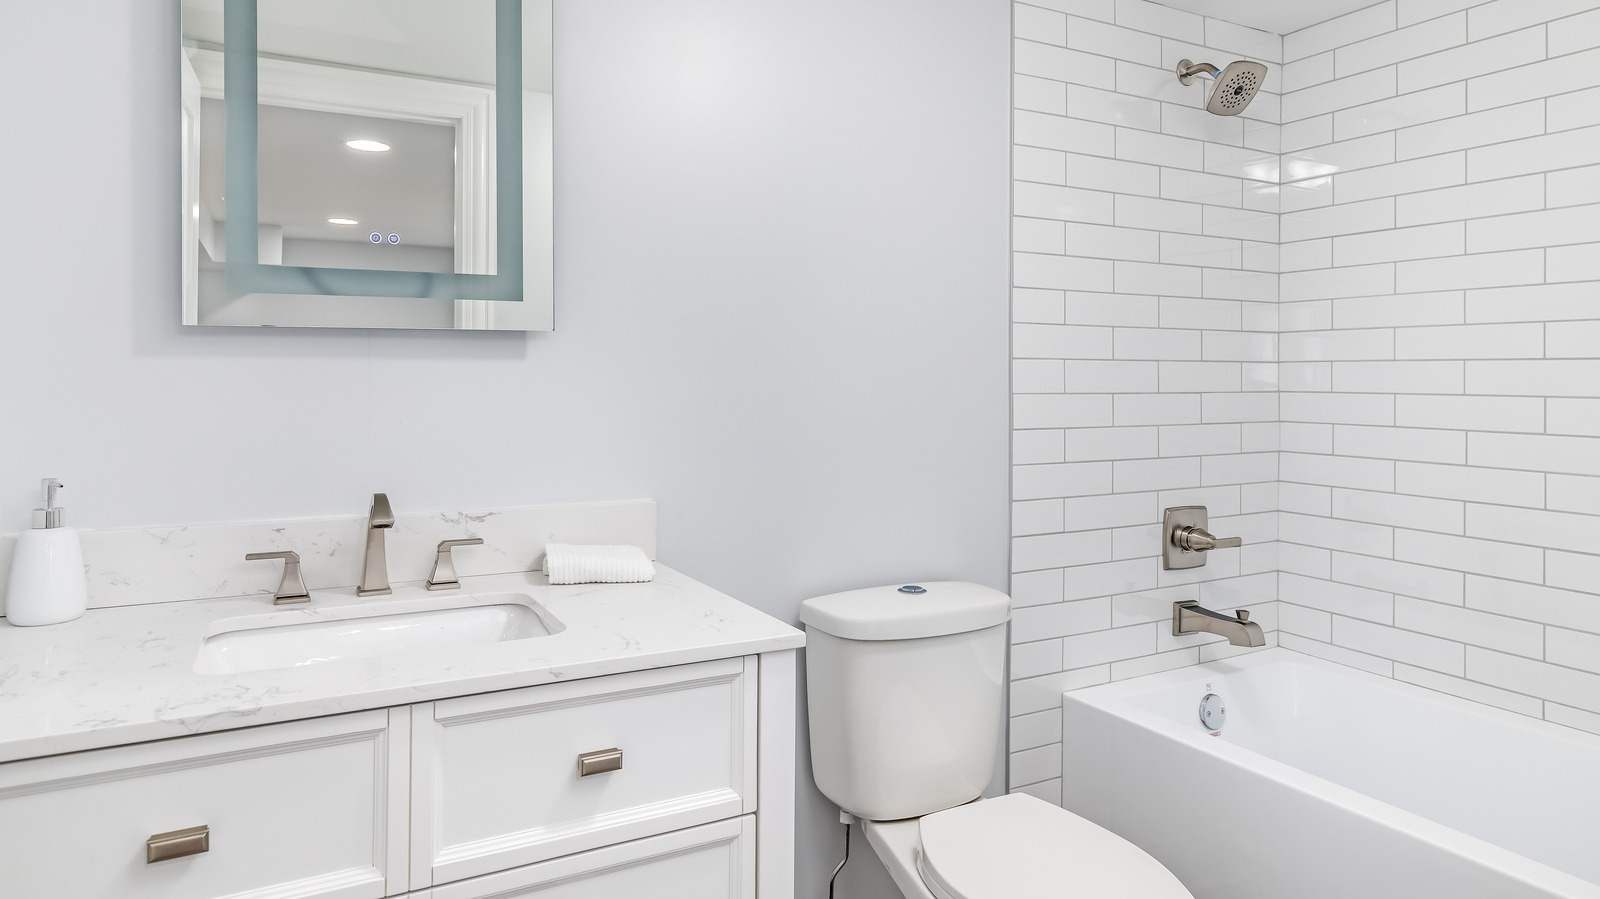 https://www.housedigest.com/img/gallery/a-design-expert-explains-how-to-add-warmth-to-your-all-white-bathroom/l-intro-1671794757.jpg